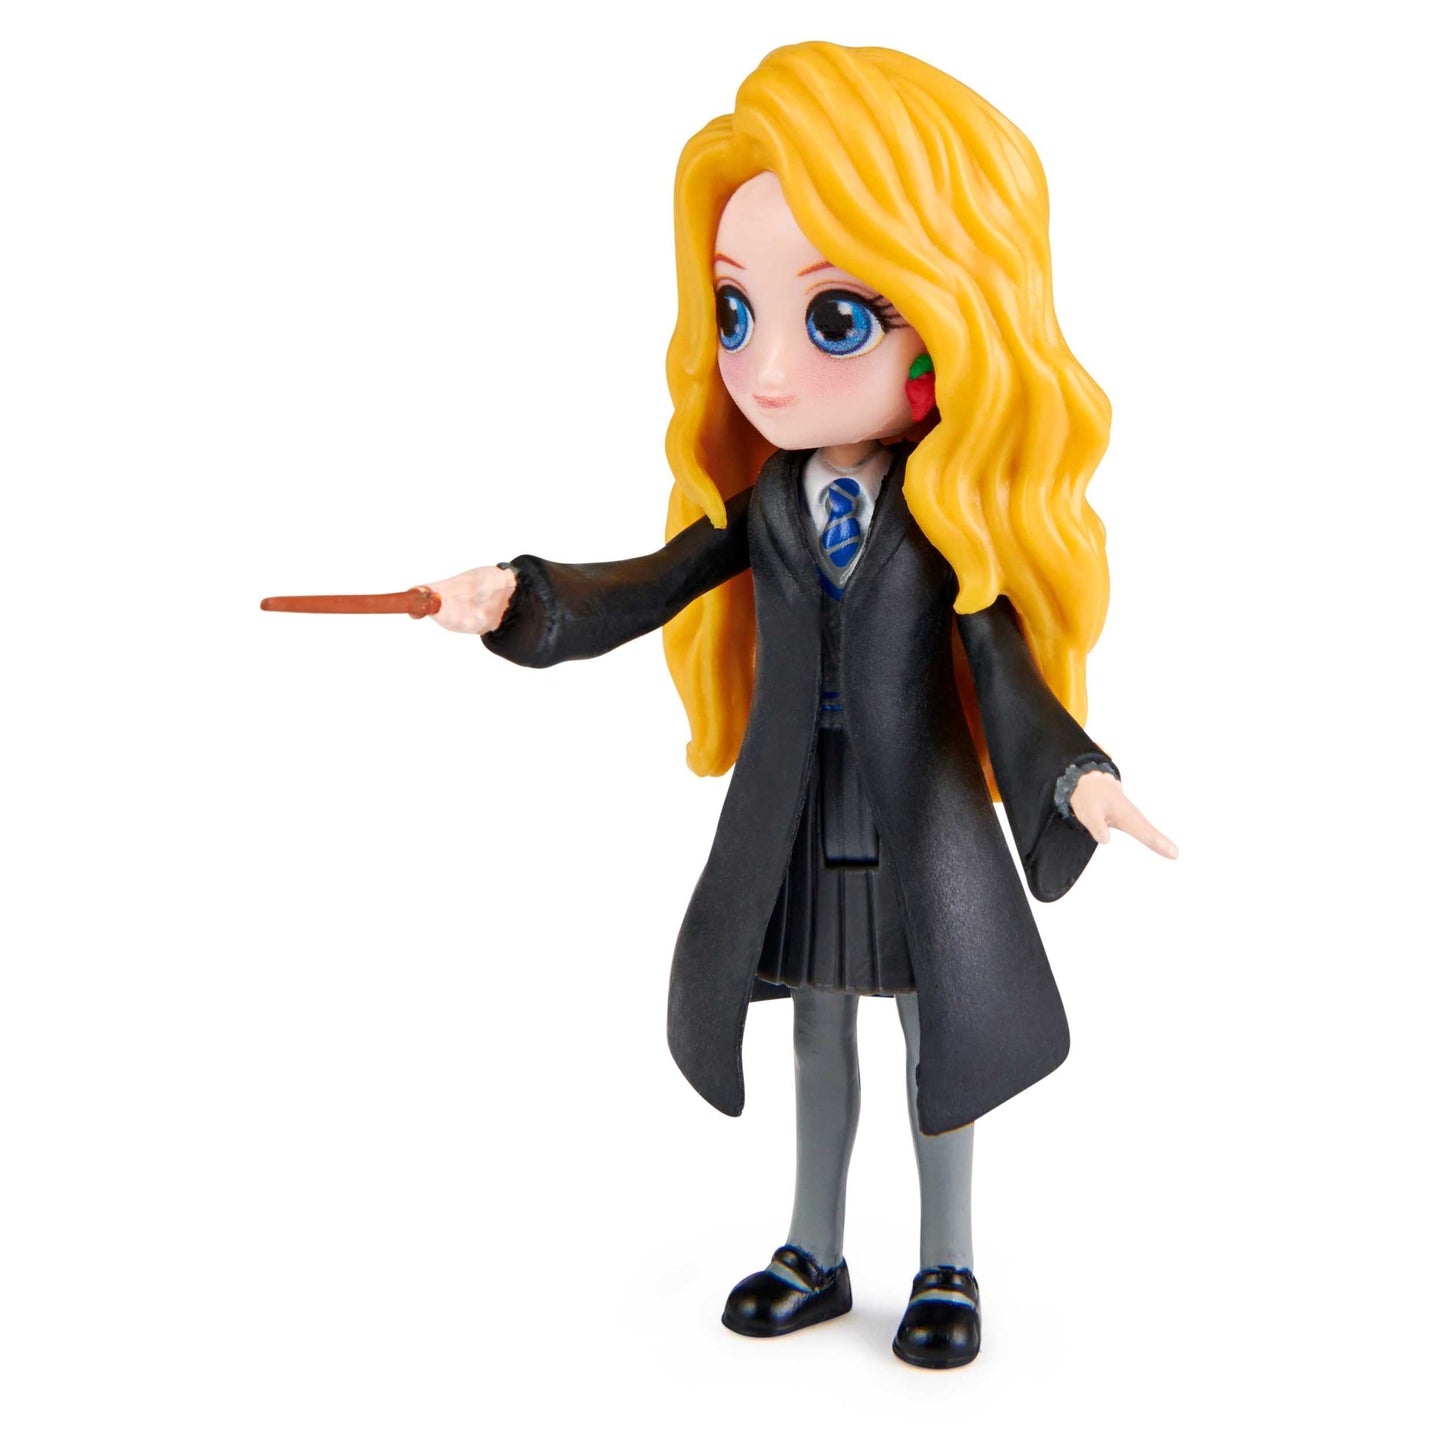 Wizarding World Harry Potter, Magical Minis Collectible 3-inch Luna Lovegood Figure, Kids Toys for Ages 6 and up